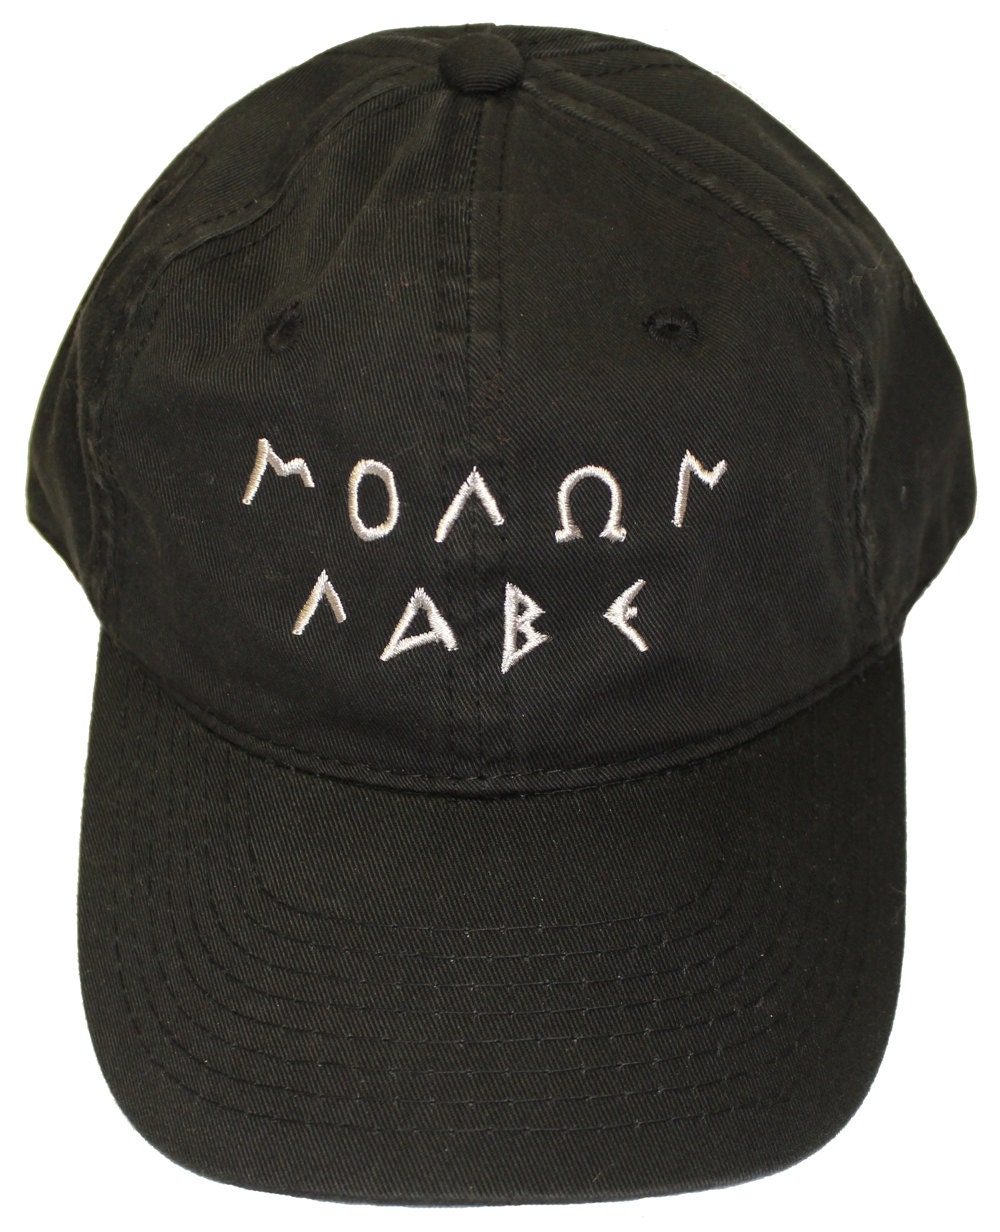 Molon Labe Embroidered Hat Old Greek